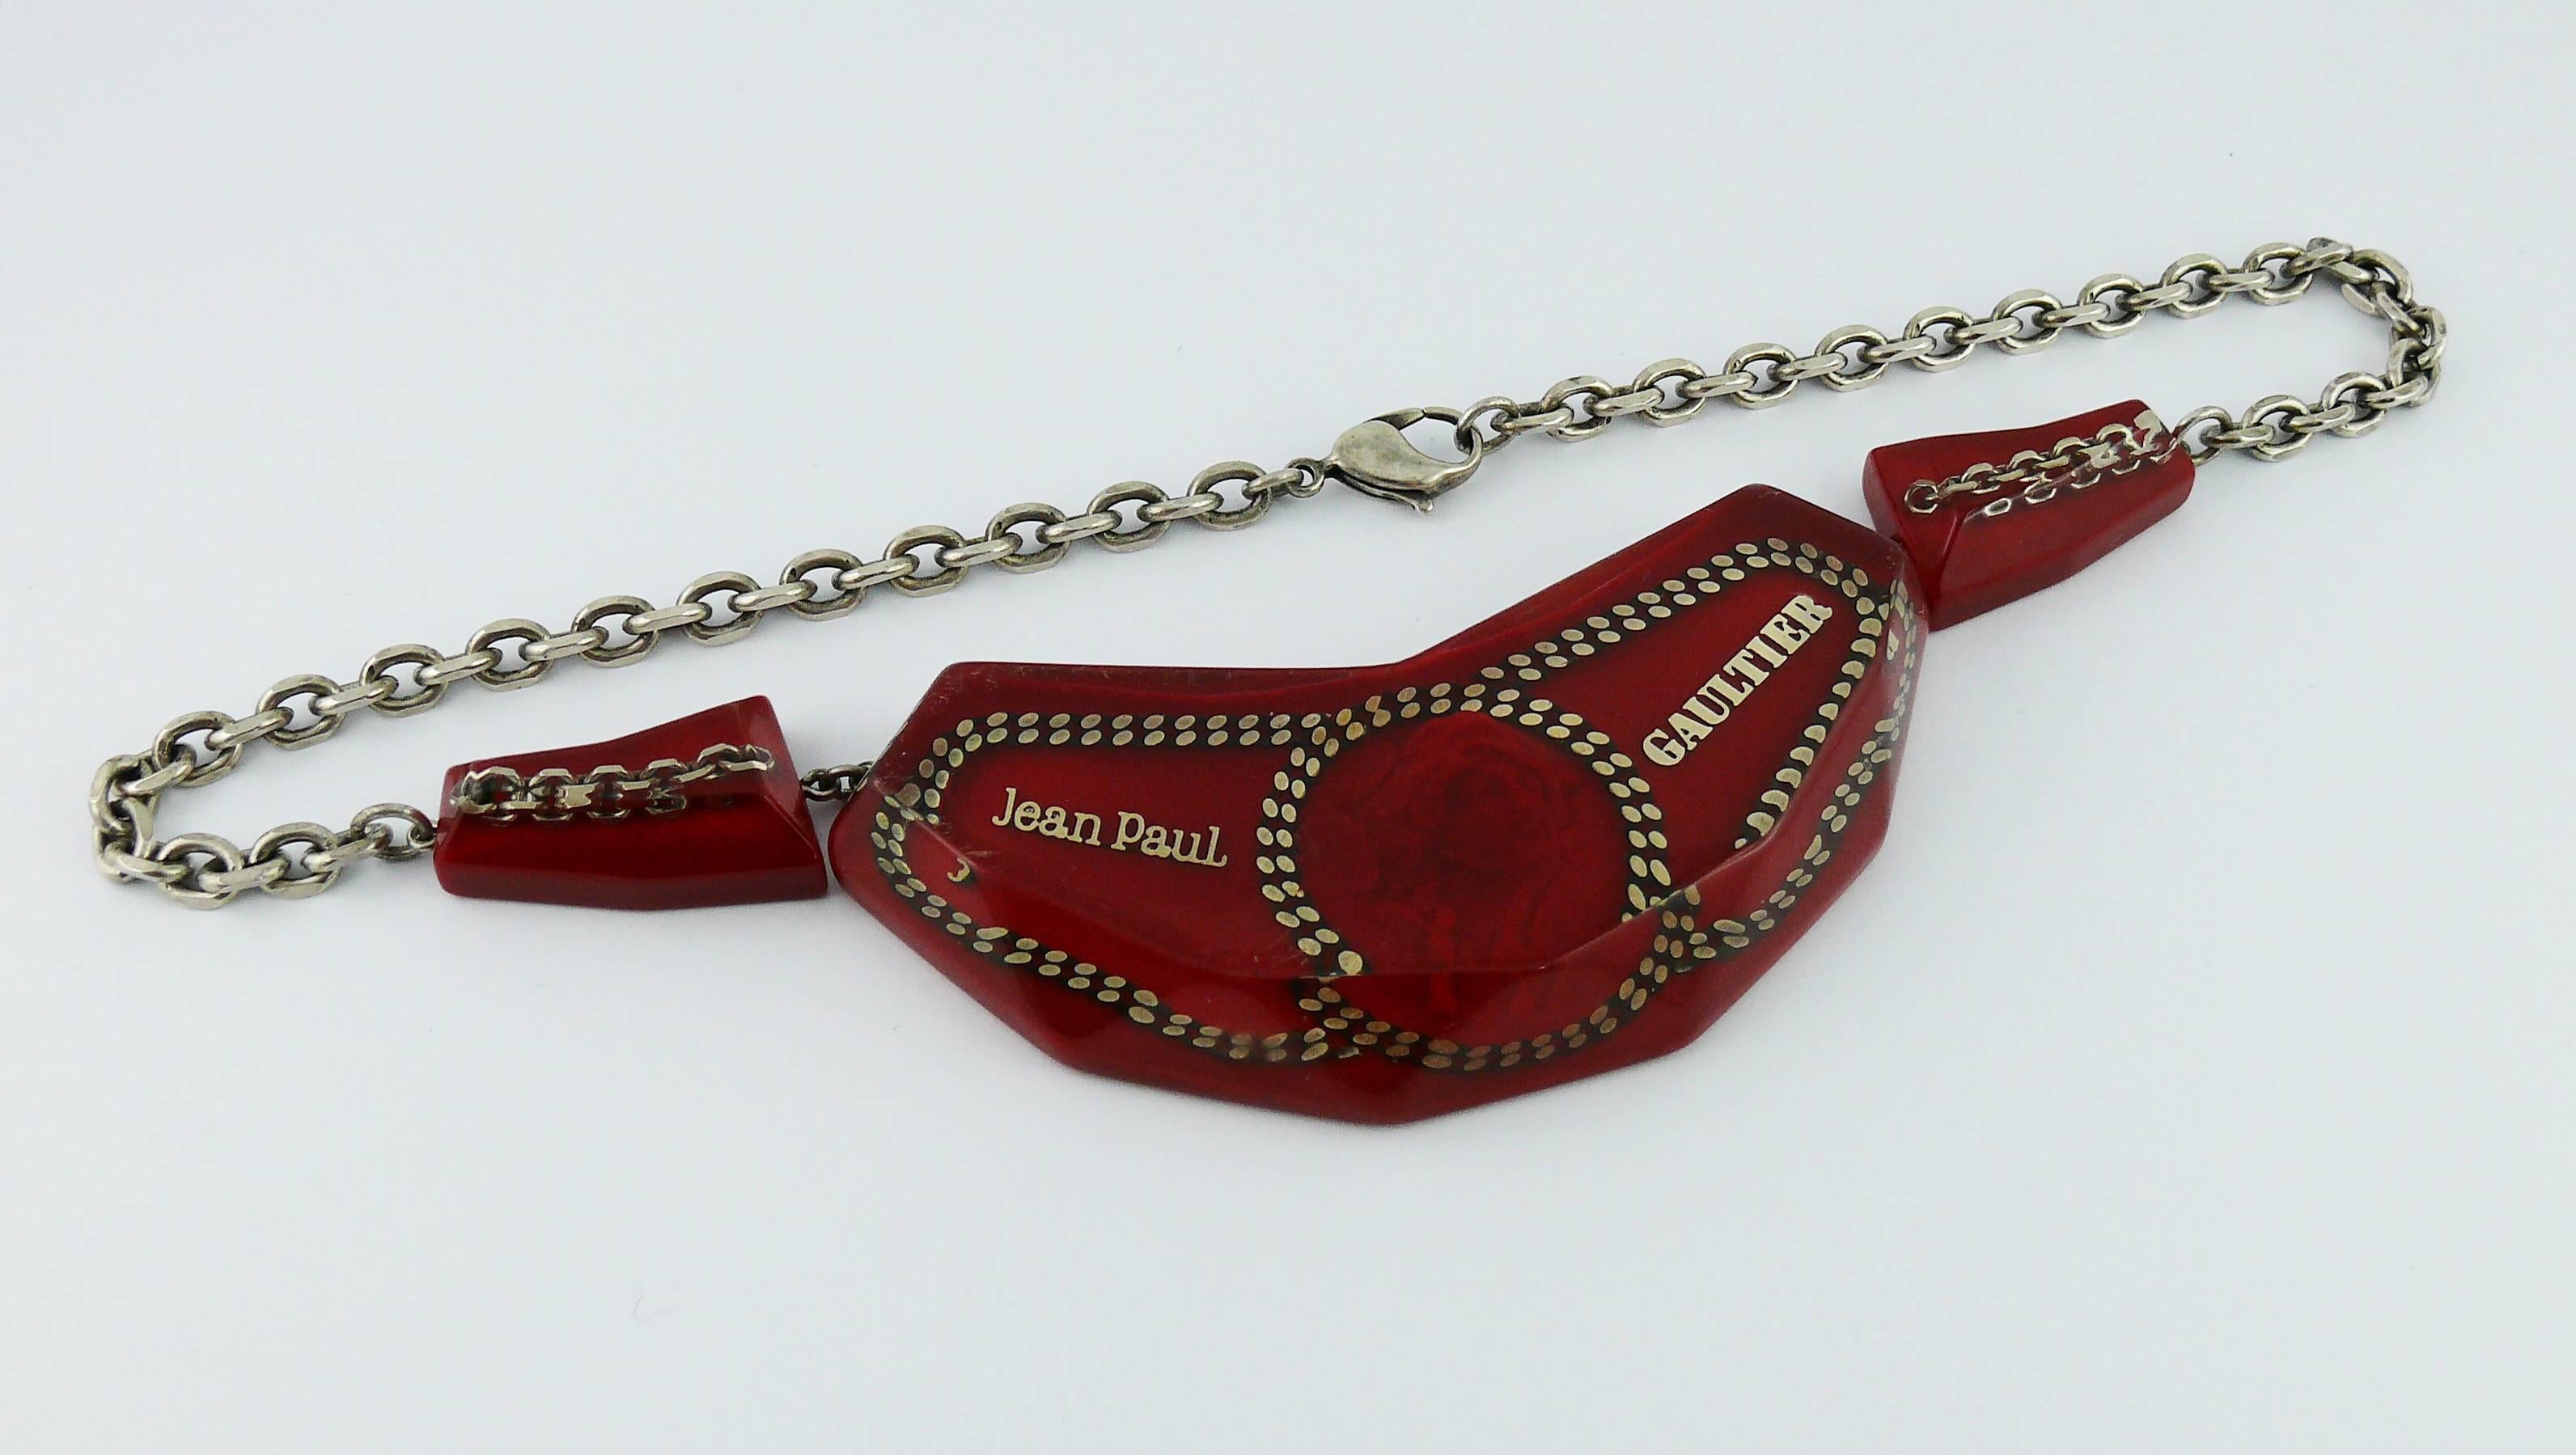 JEAN PAUL GAULTIER triptych necklace featuring clear and red resin elements with chain inlaid. Central element is marked JEAN PAUL GAULTIER and features a 3-D woman profile.

Early 2000s.

Silver toned chaine.
Lobster clasp closure.

Indicative